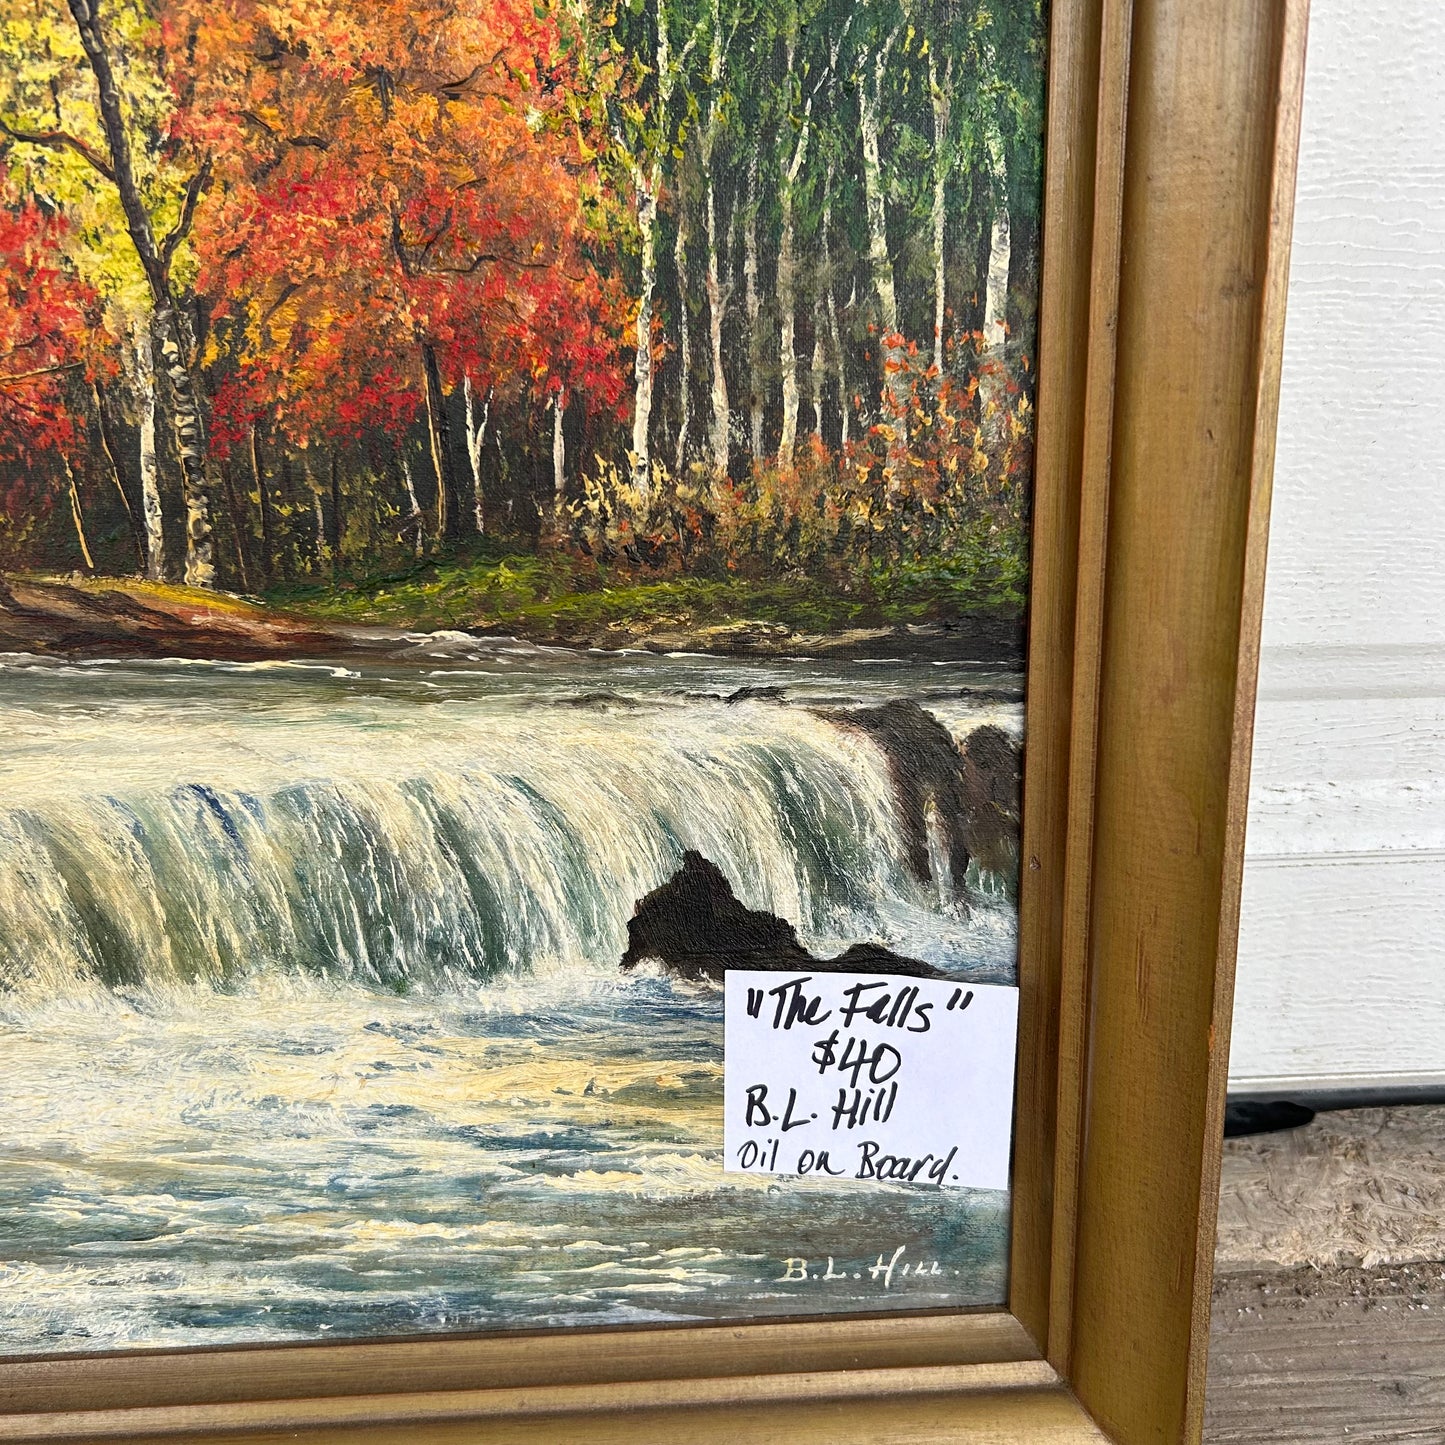 “The Falls” by B.L. Hill Oil Painting